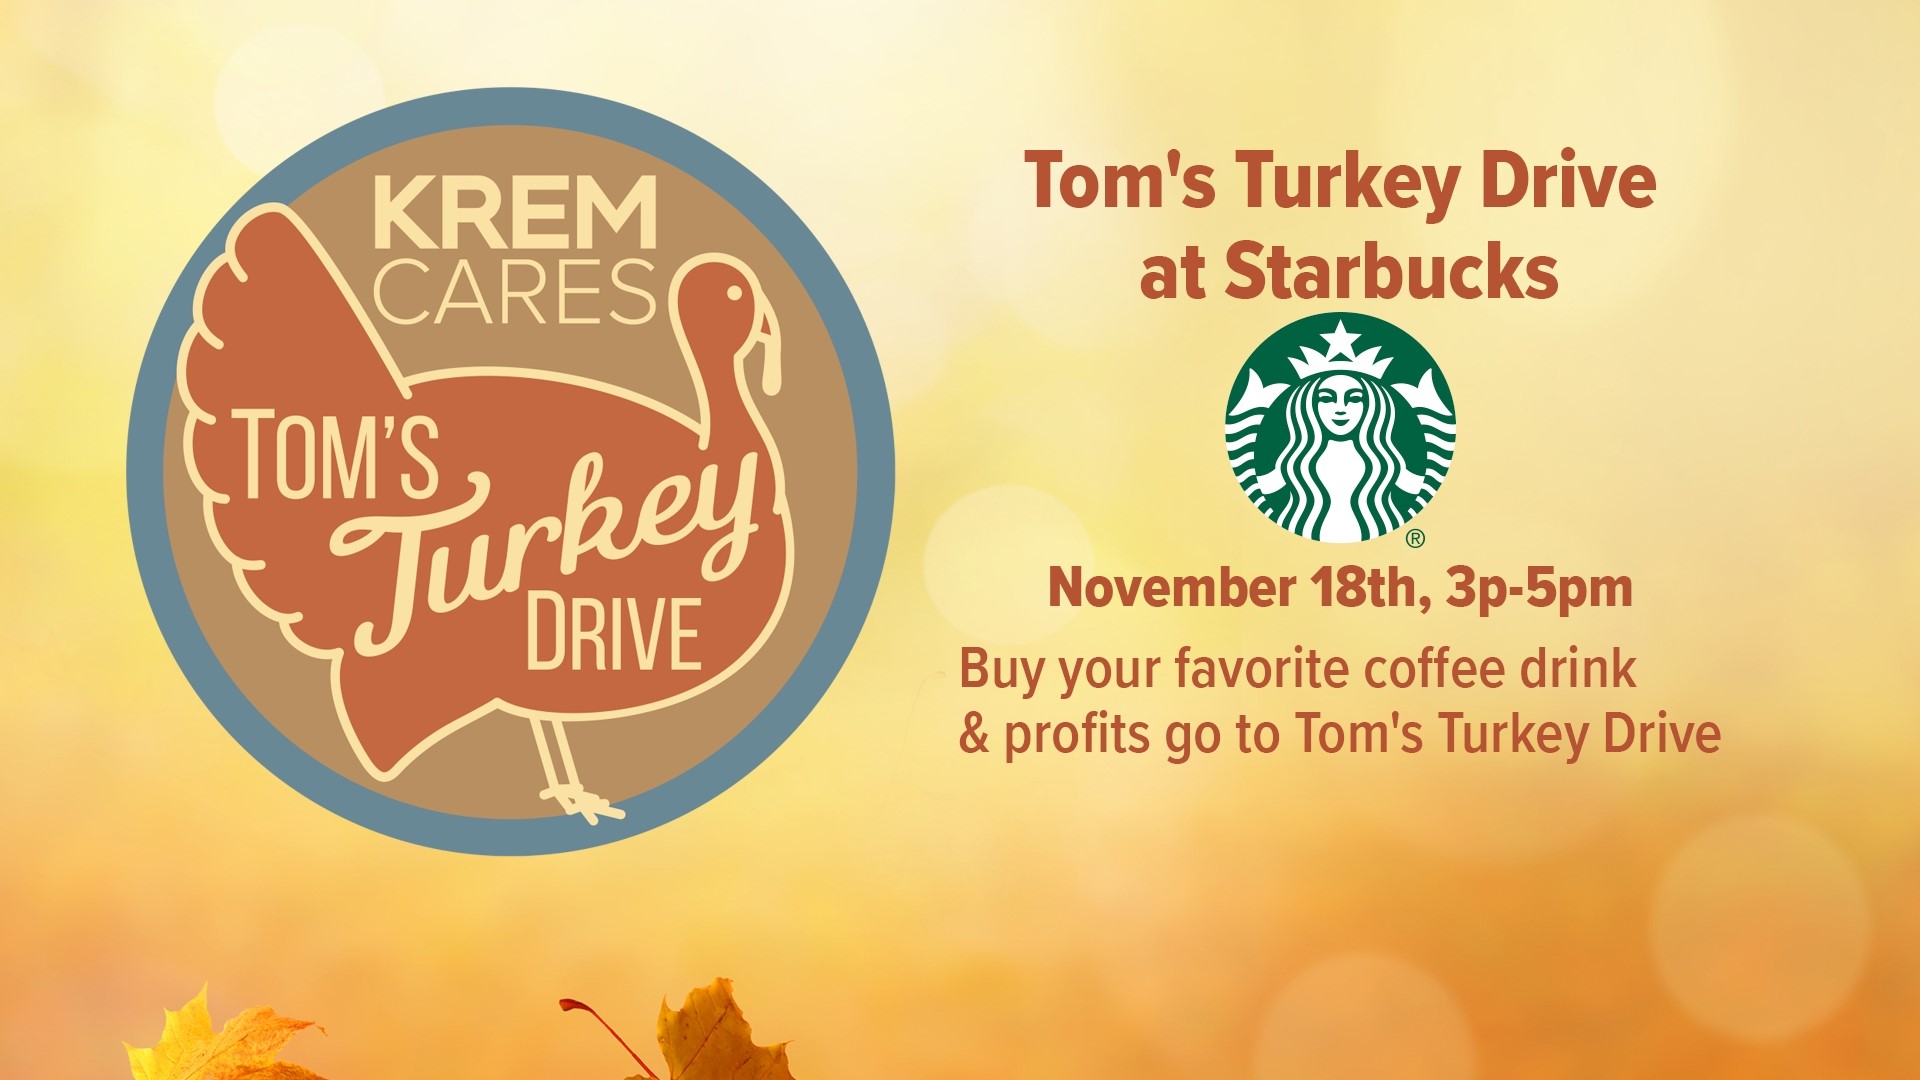 Tom's Turkey Drive at Starbucks is exactly one week away. Buy your favorite drink from 3-5 p.m. to support Tom's Turkey Drive.